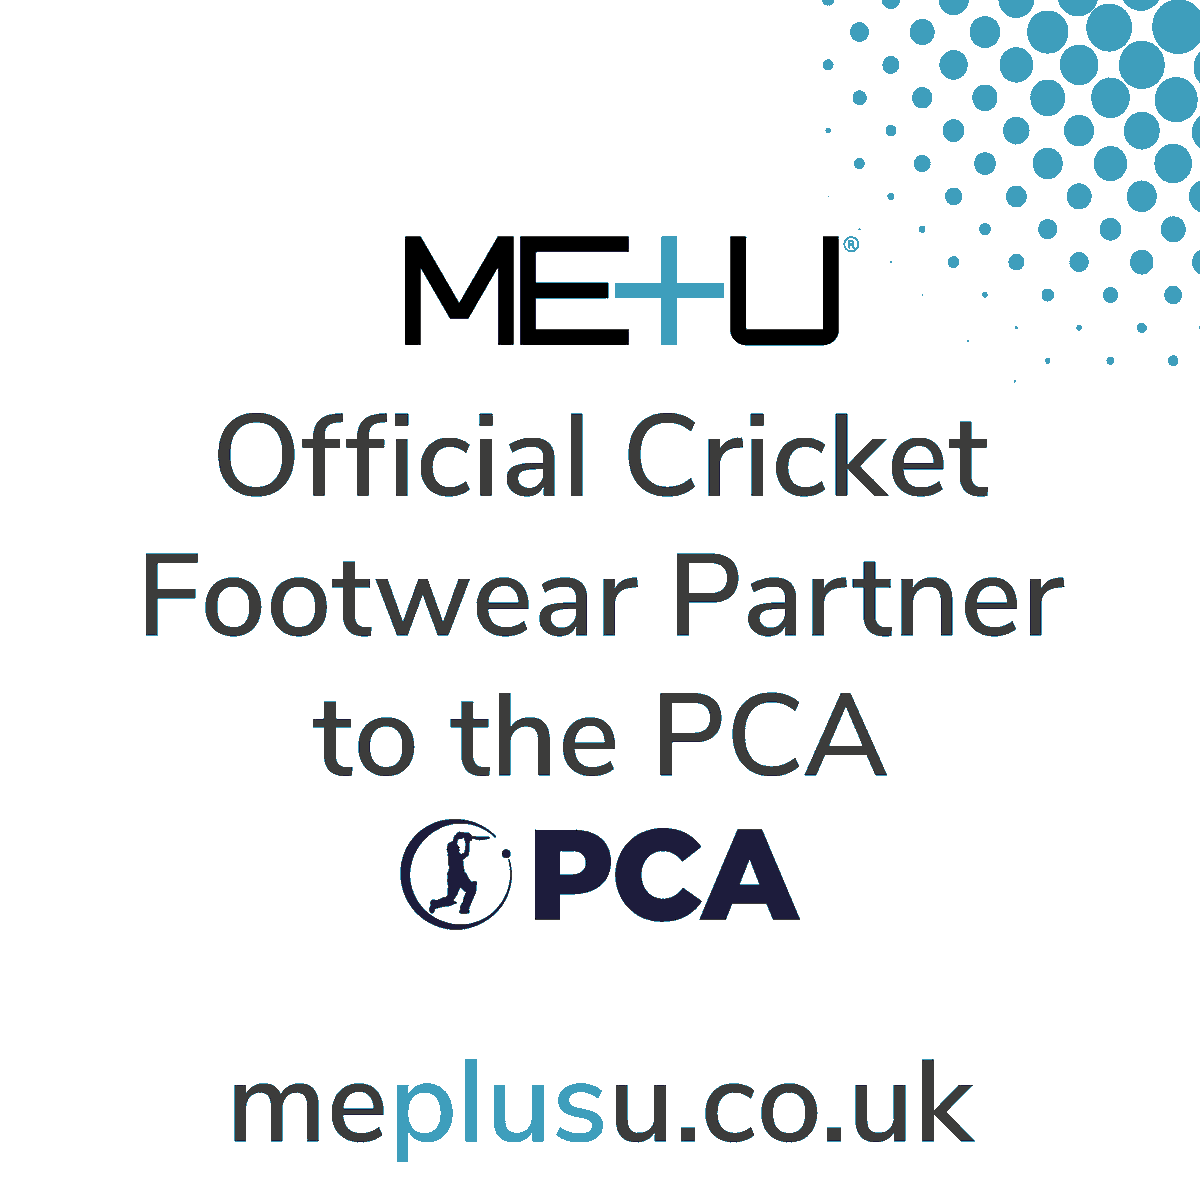 We are pleased to announce our 4-year deal as the Official Cricket Footwear Partner to the PCA. For more information, visit meplusu.co.uk #cricket #cricket #cricketshoes #womenscricket #thepca @WisdenCricket #sportfootwear